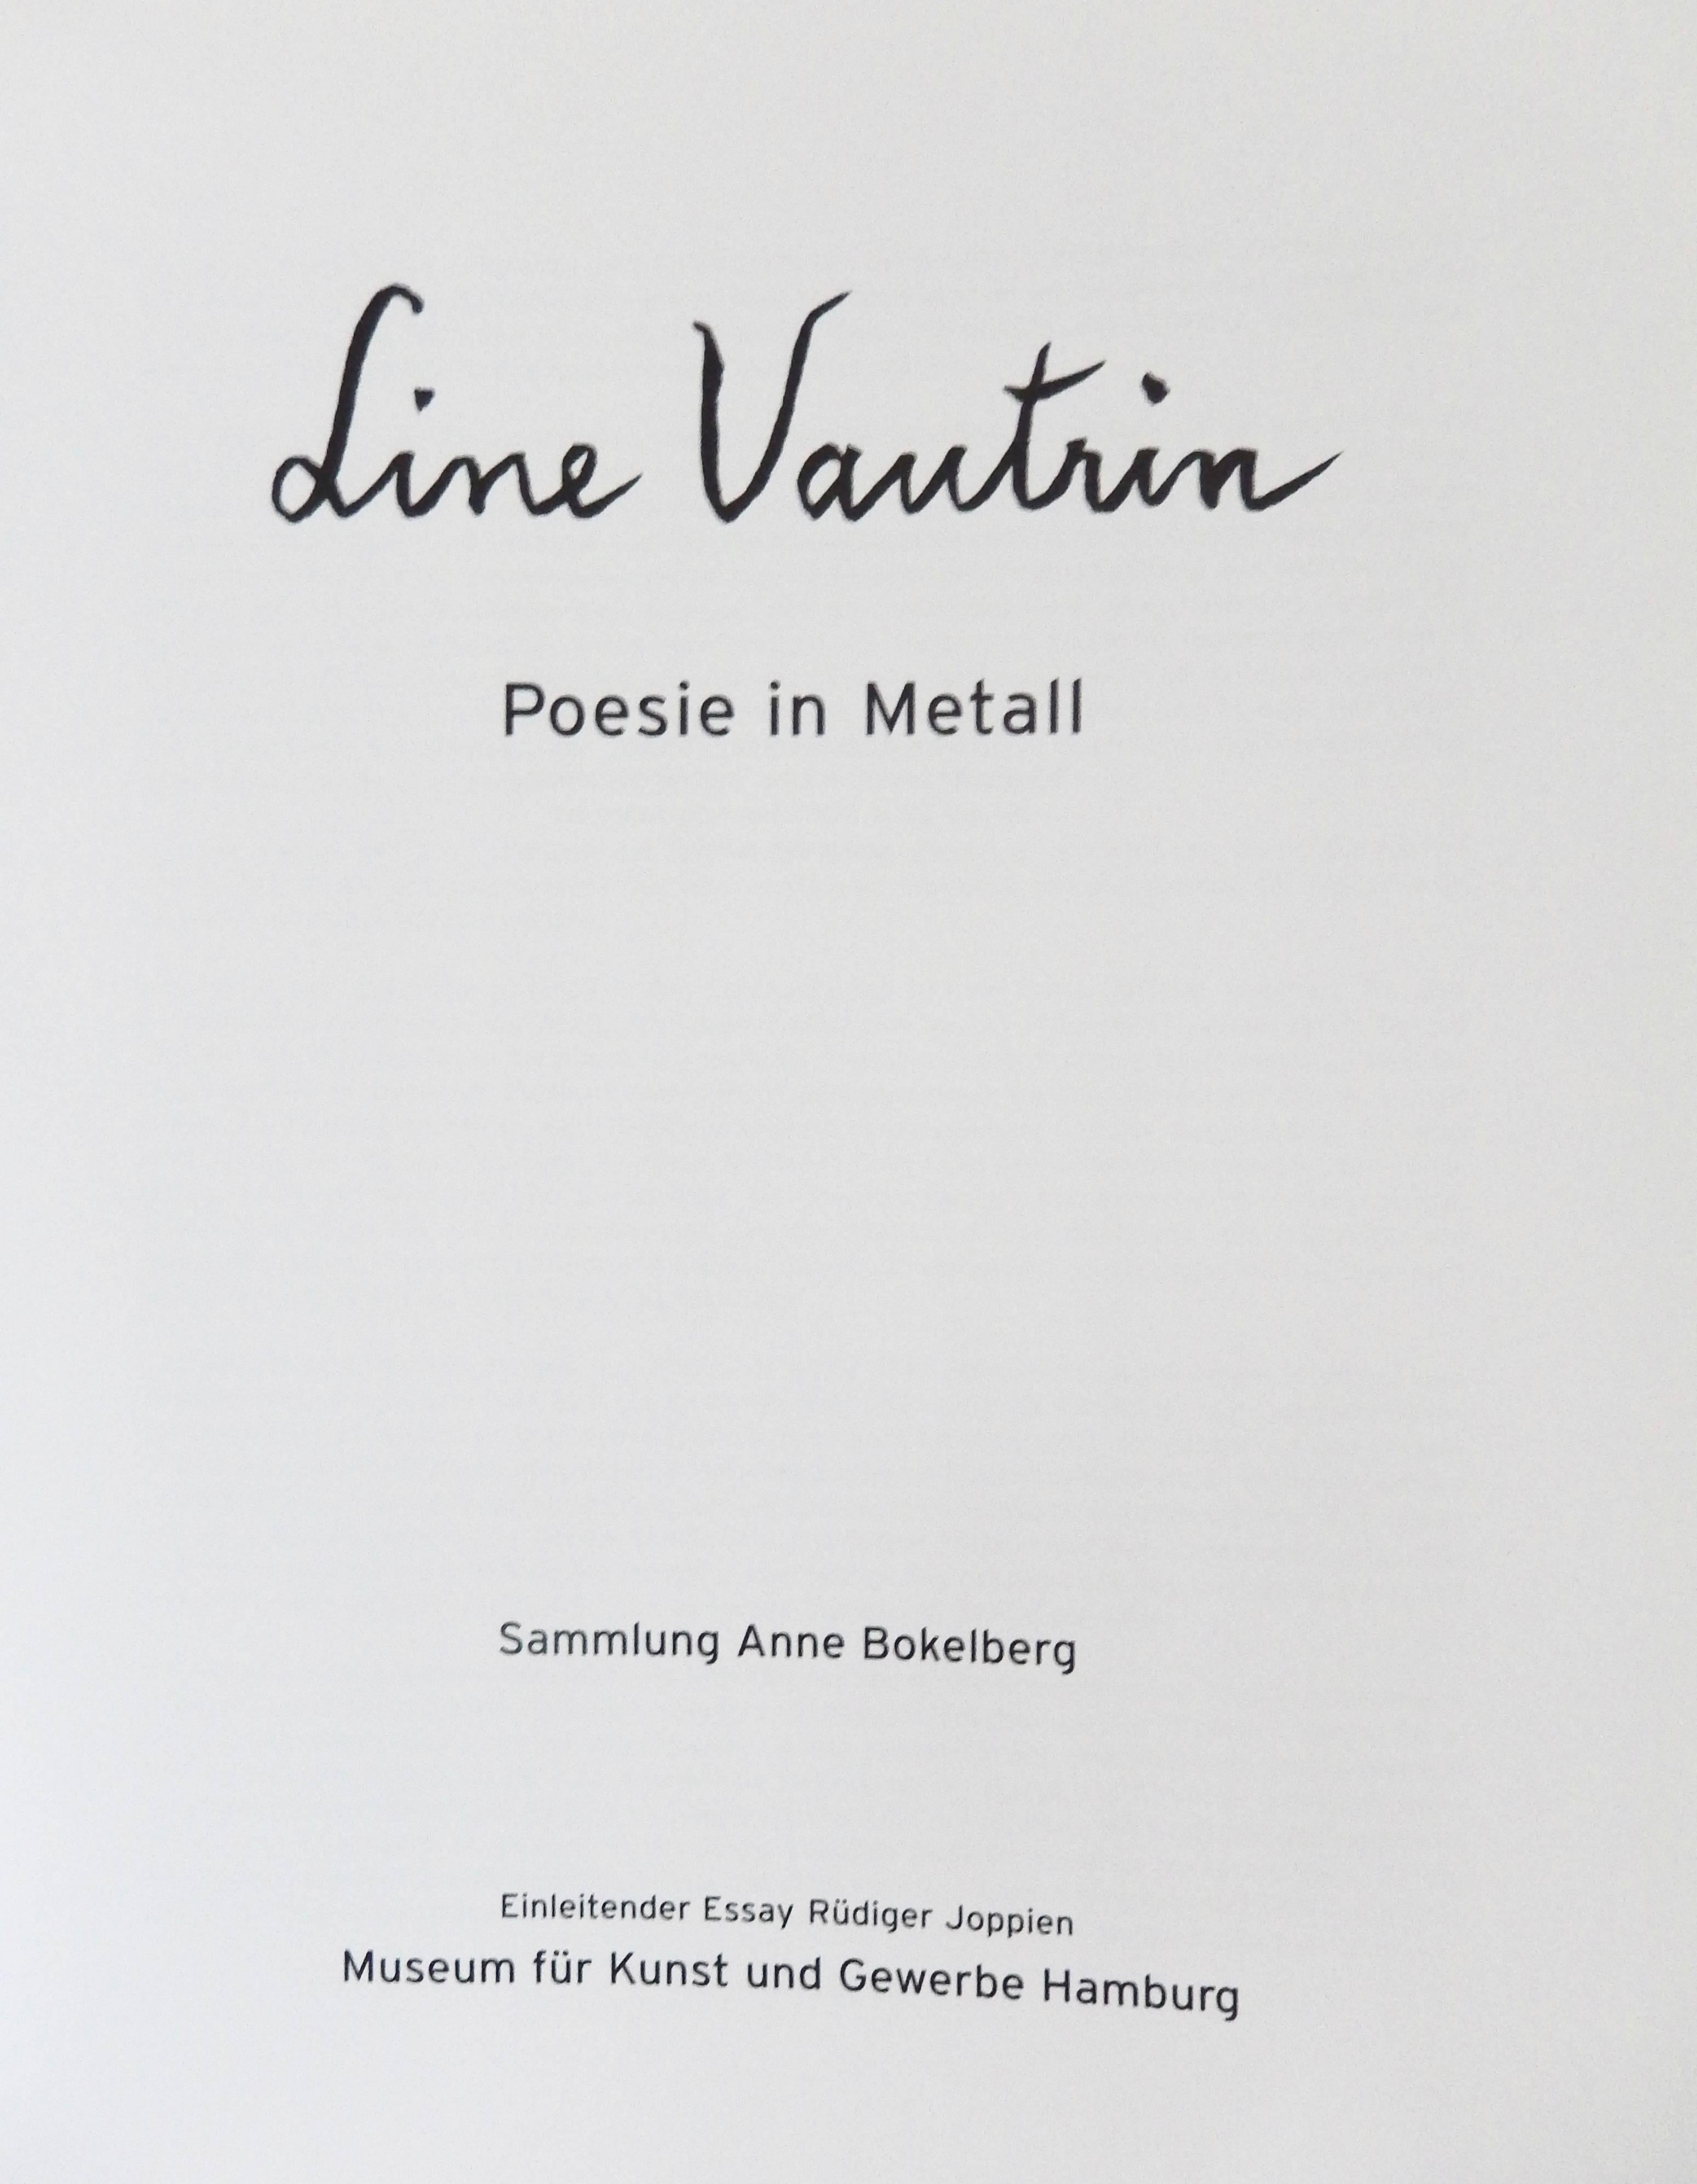 A limited edition catalog, now out-of-print, on the work of Line Vautrin (1913-1997). It was published in coordination with the 2003 exhibition at the Museum fur Kunst und Gewerbe, Hamburg, that featured pieces from the collection of Anne Bokelberg.